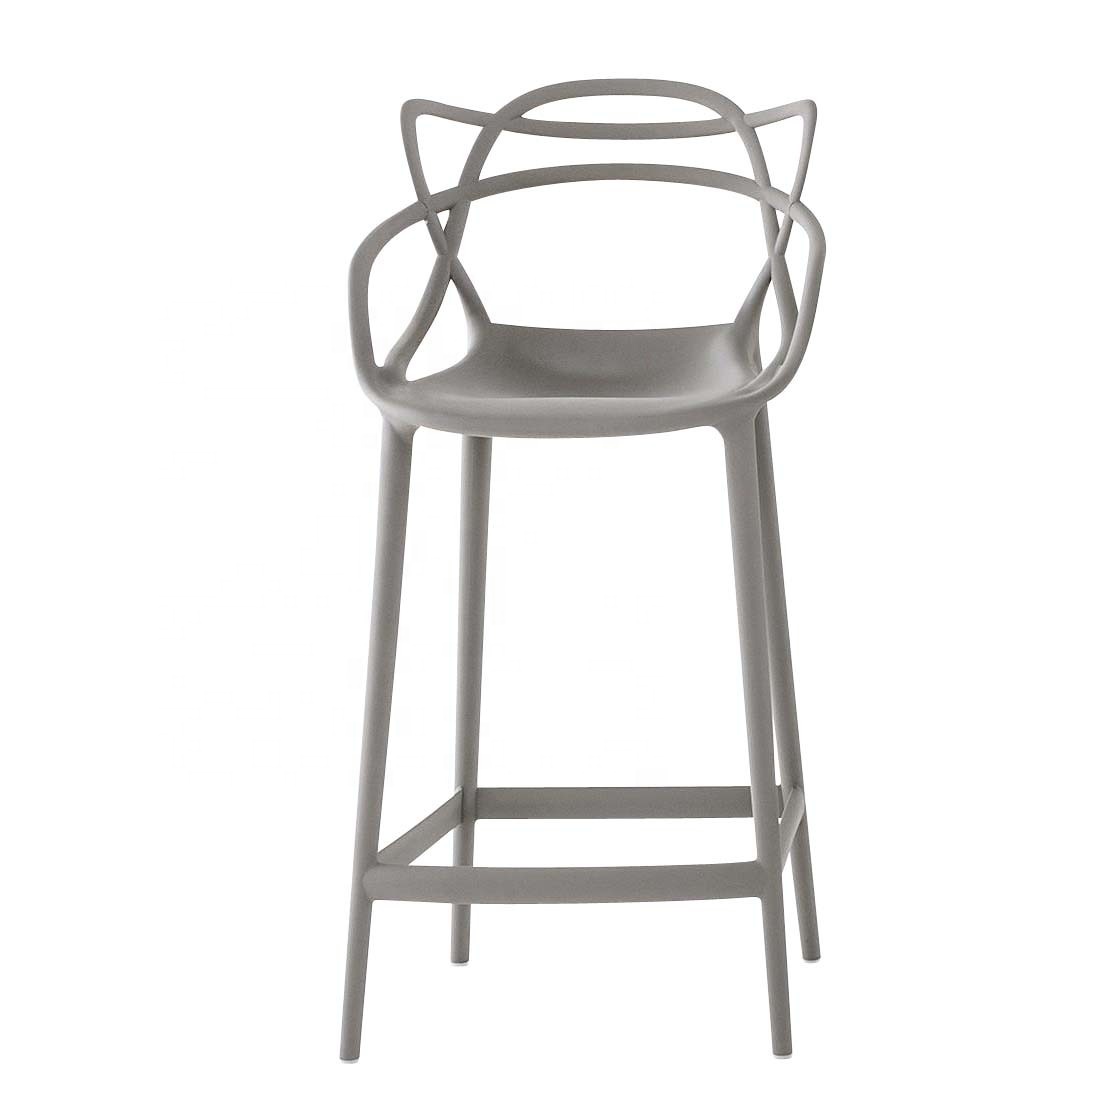 Hot Selling comfortable paint Craft Tripod Commercial Business Luxury Metal legs High Barstool chair vintage Bar stools chairs